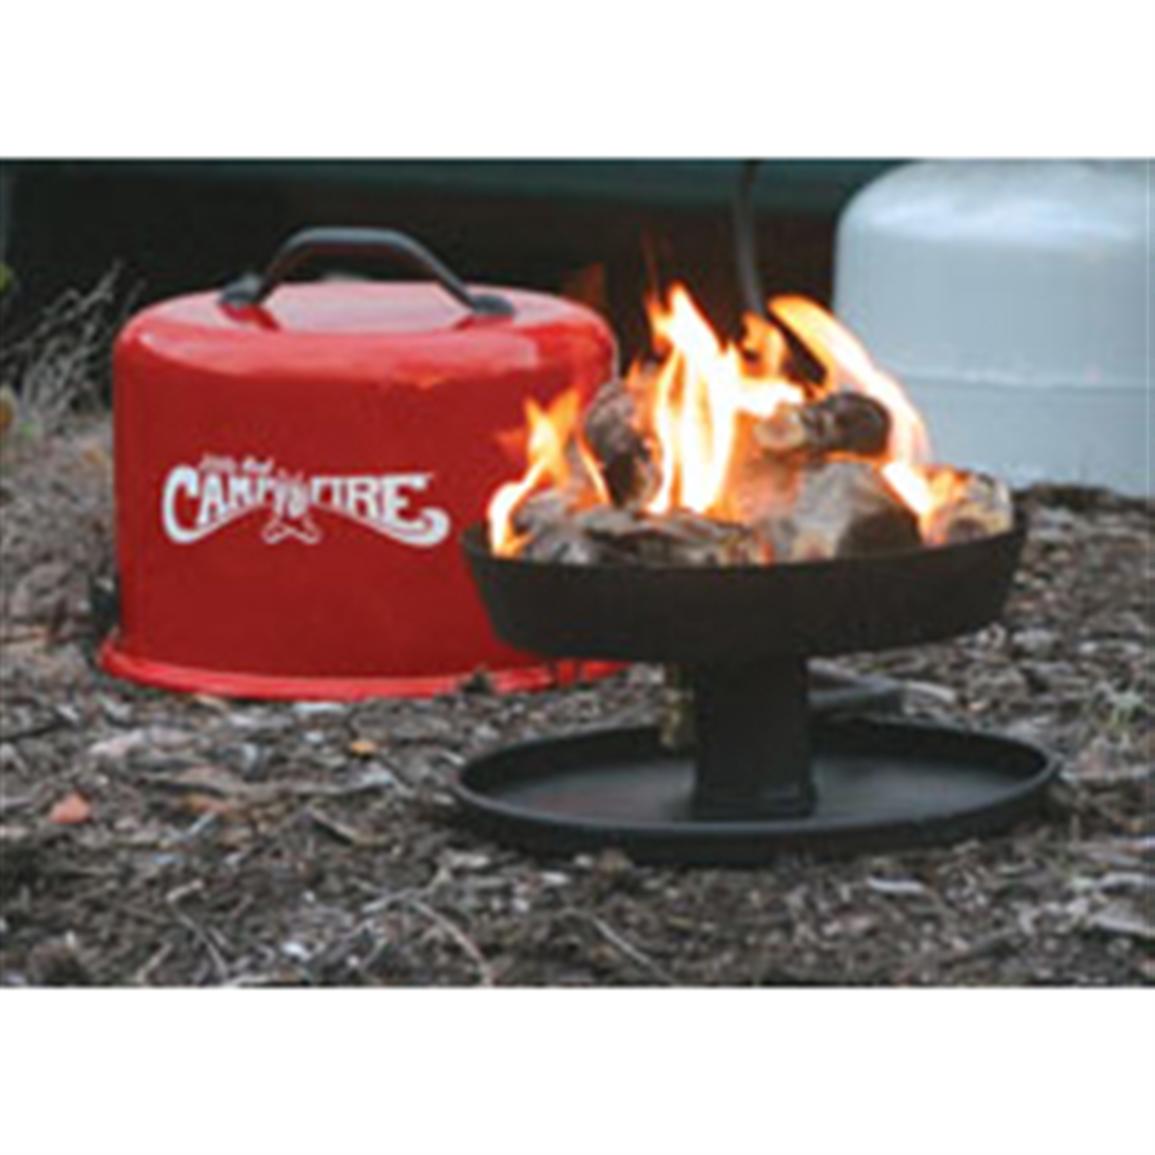 Camco Little Red Campfire 195100 Grills Smokers At Sportsman S Guide